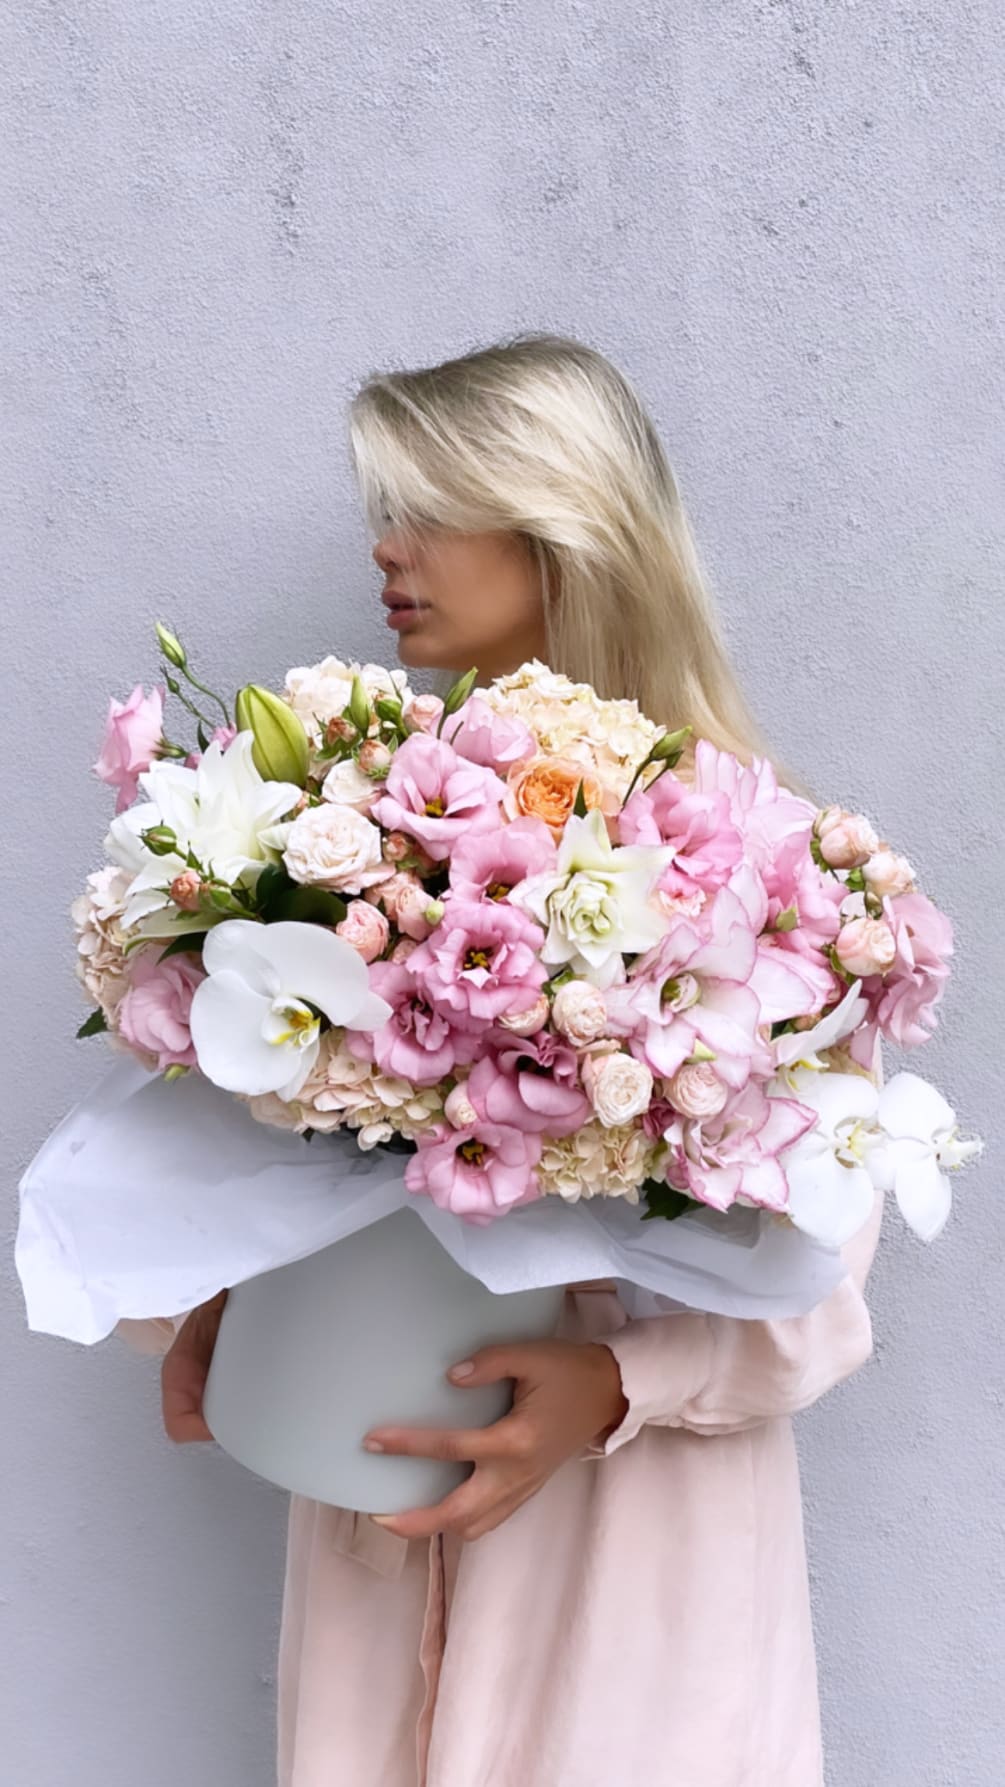 Beautiful and amazing flower arrangement in pale pink flowers